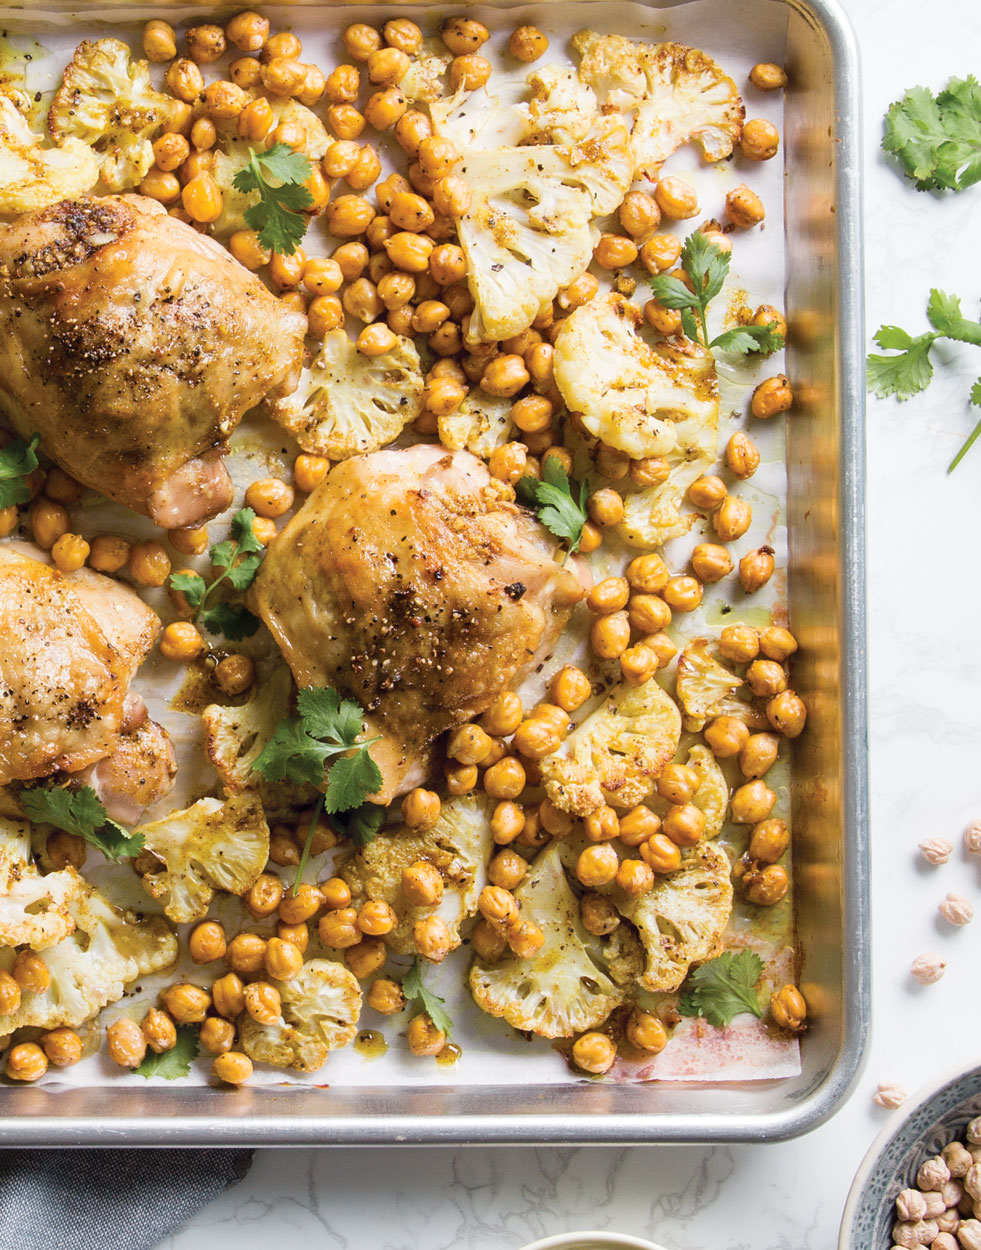 Curried Chicken with Roasted Chickpeas and Cauliflower